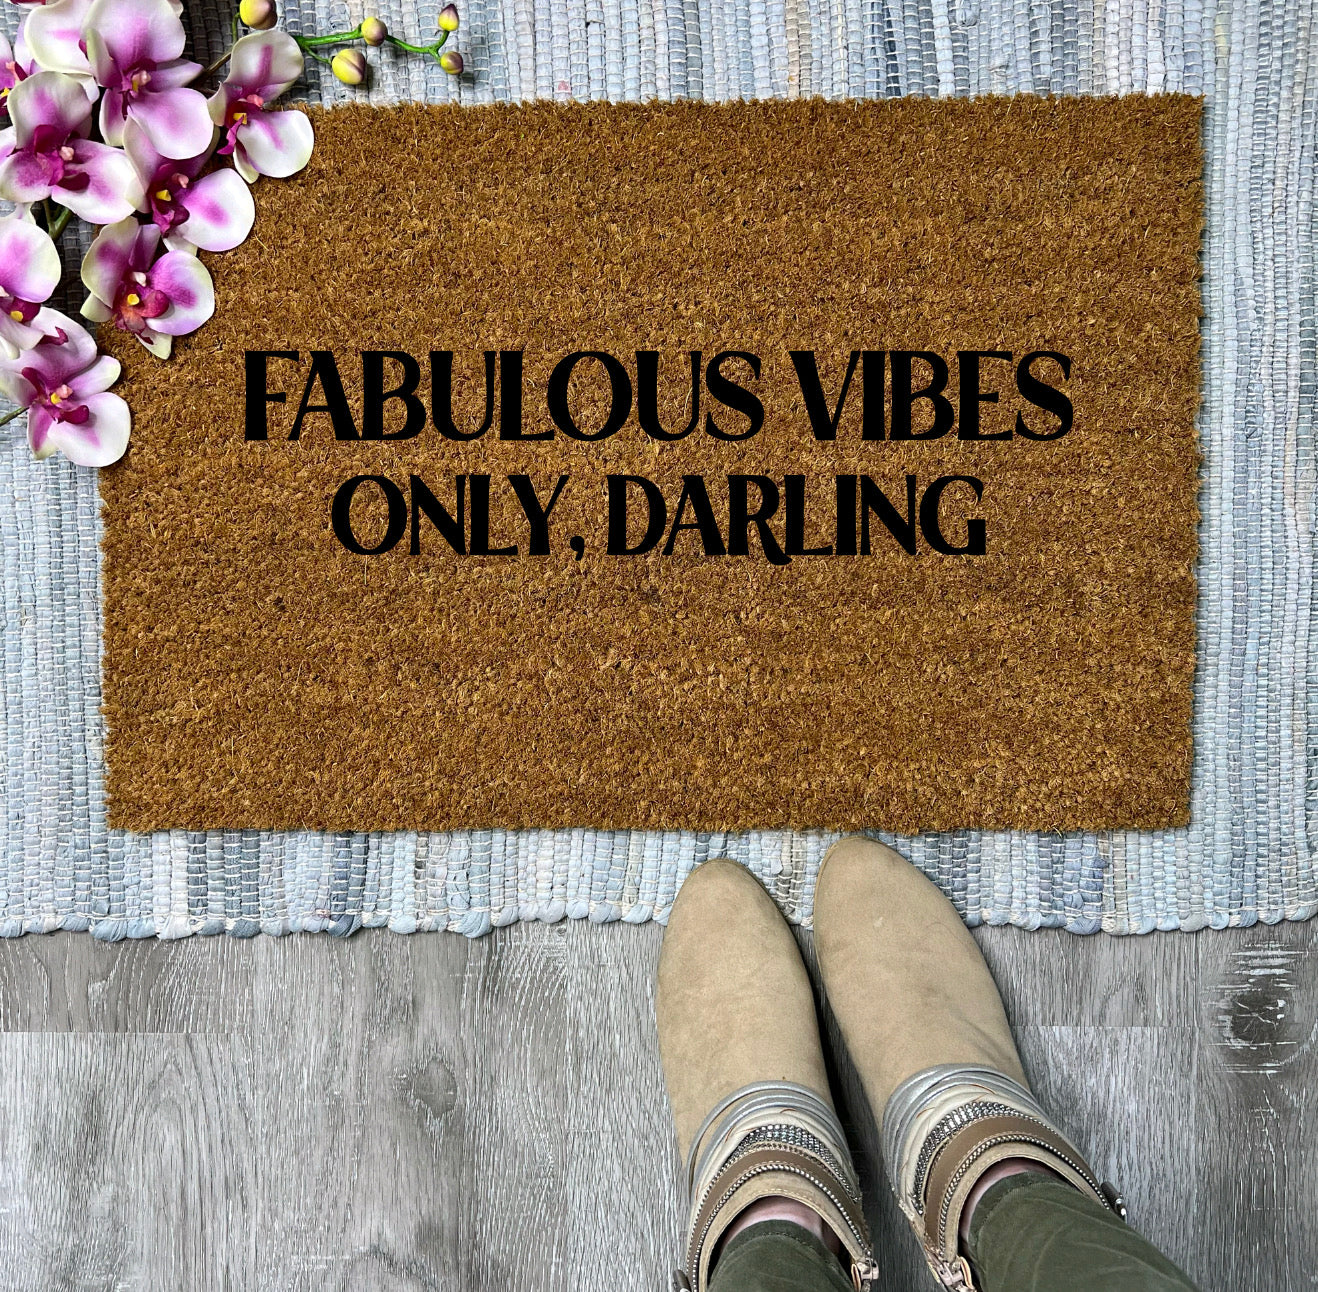 Fabulous Vibes Only, Darling